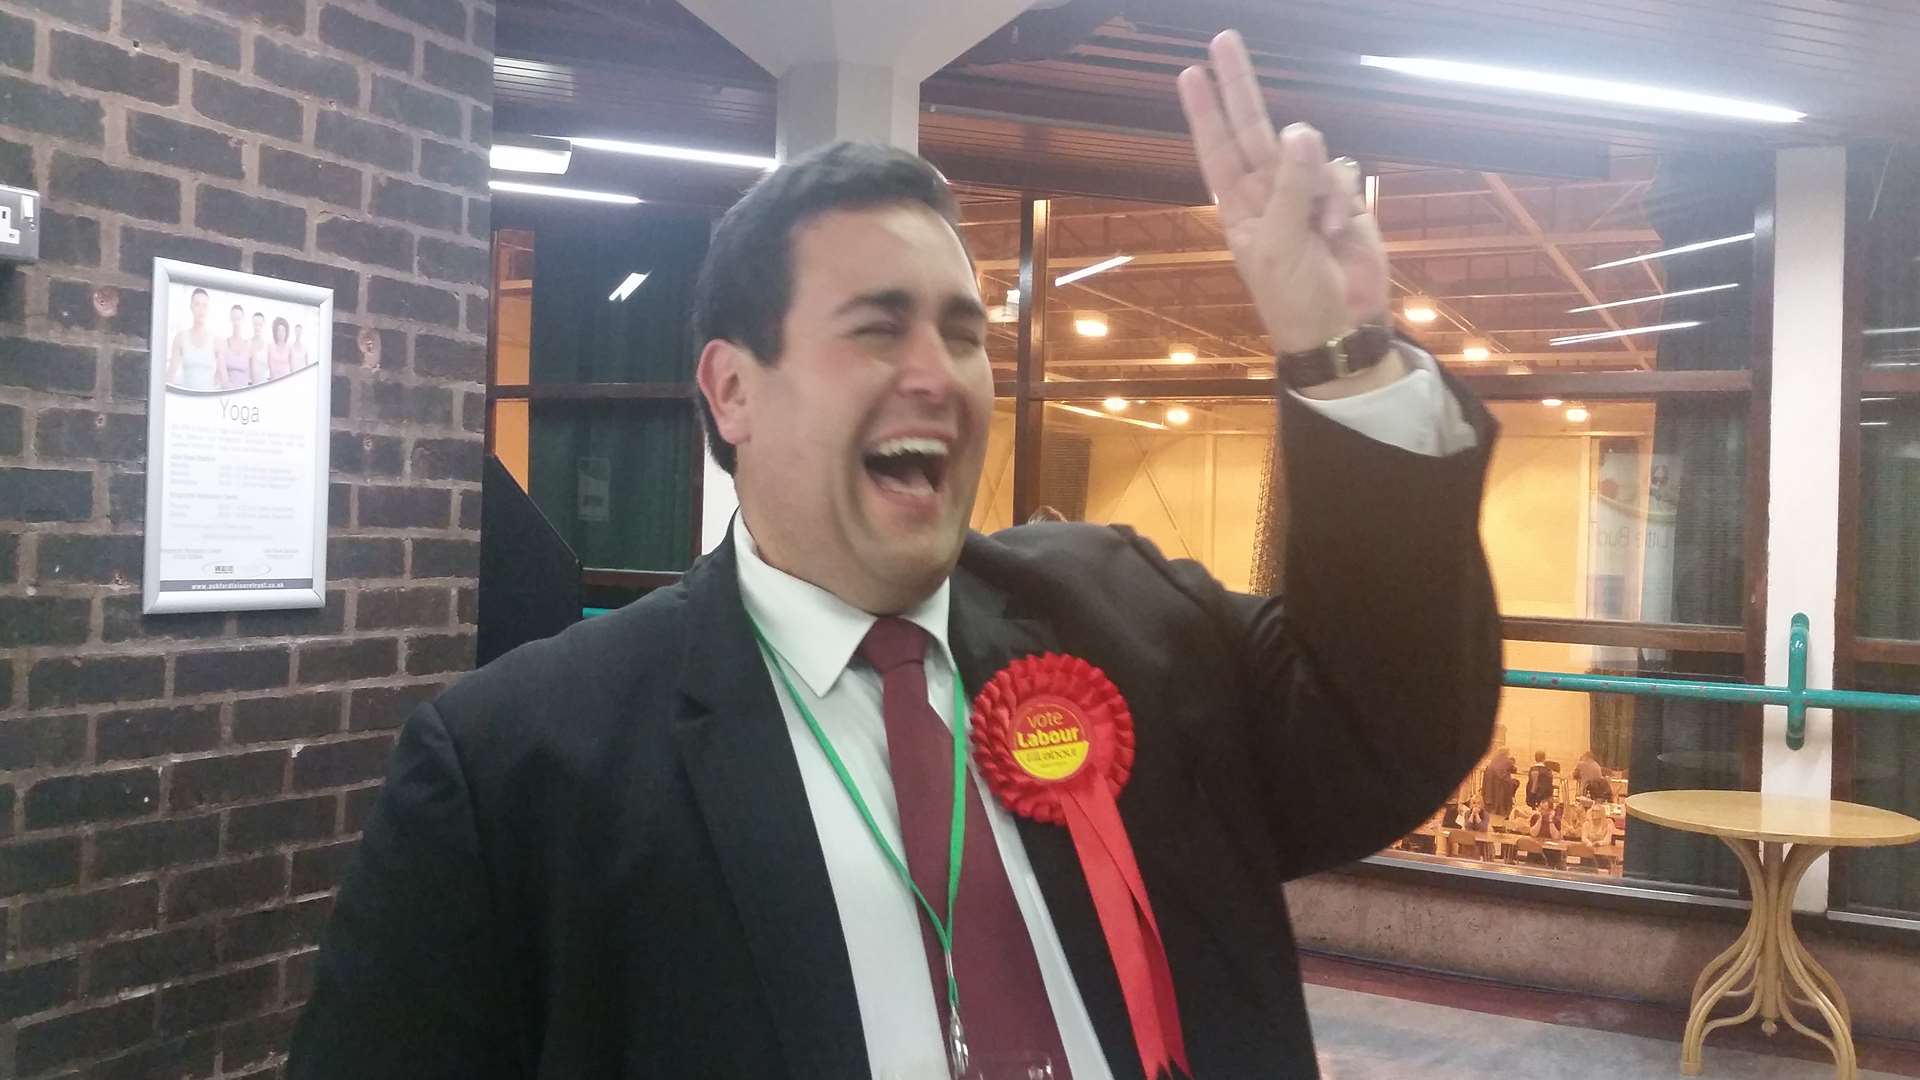 Labour candidate Brendan Chilton is feeling positive